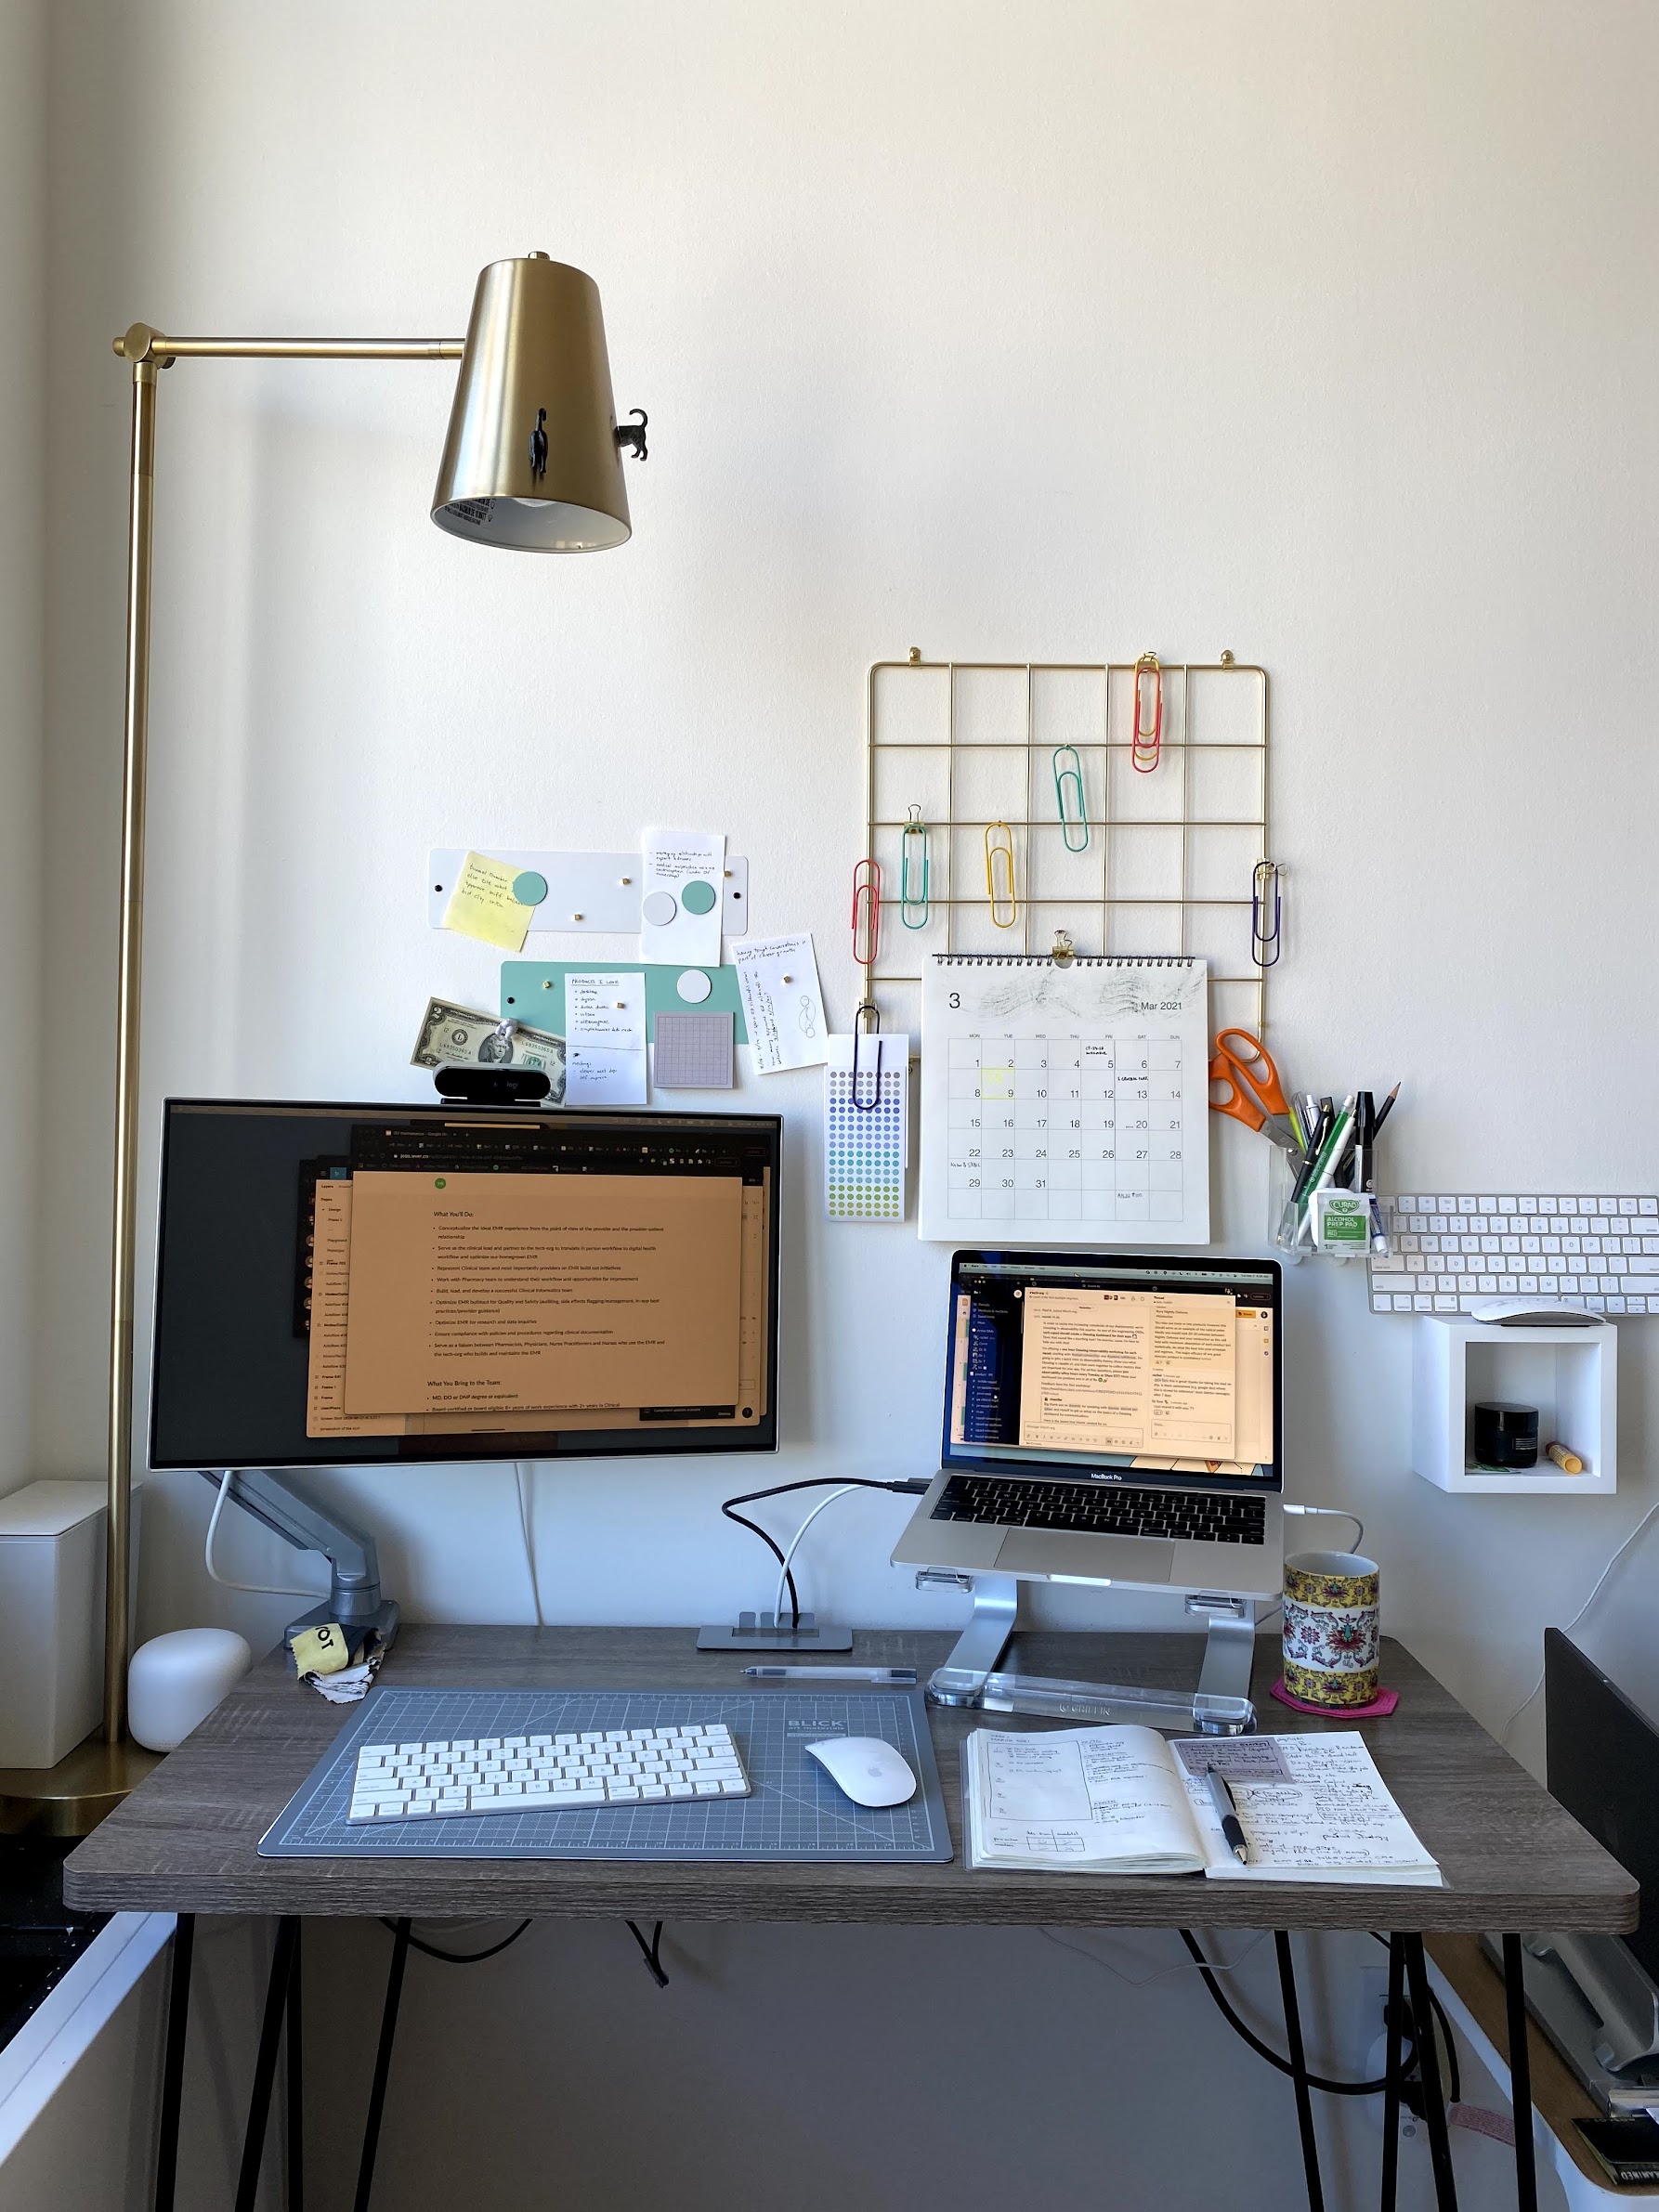 An office setup in the naturally-lit corner of a bright room with white wall. An open Macbook Pro and computer monitor sit on the writing desk, with various other stationery items scattered about